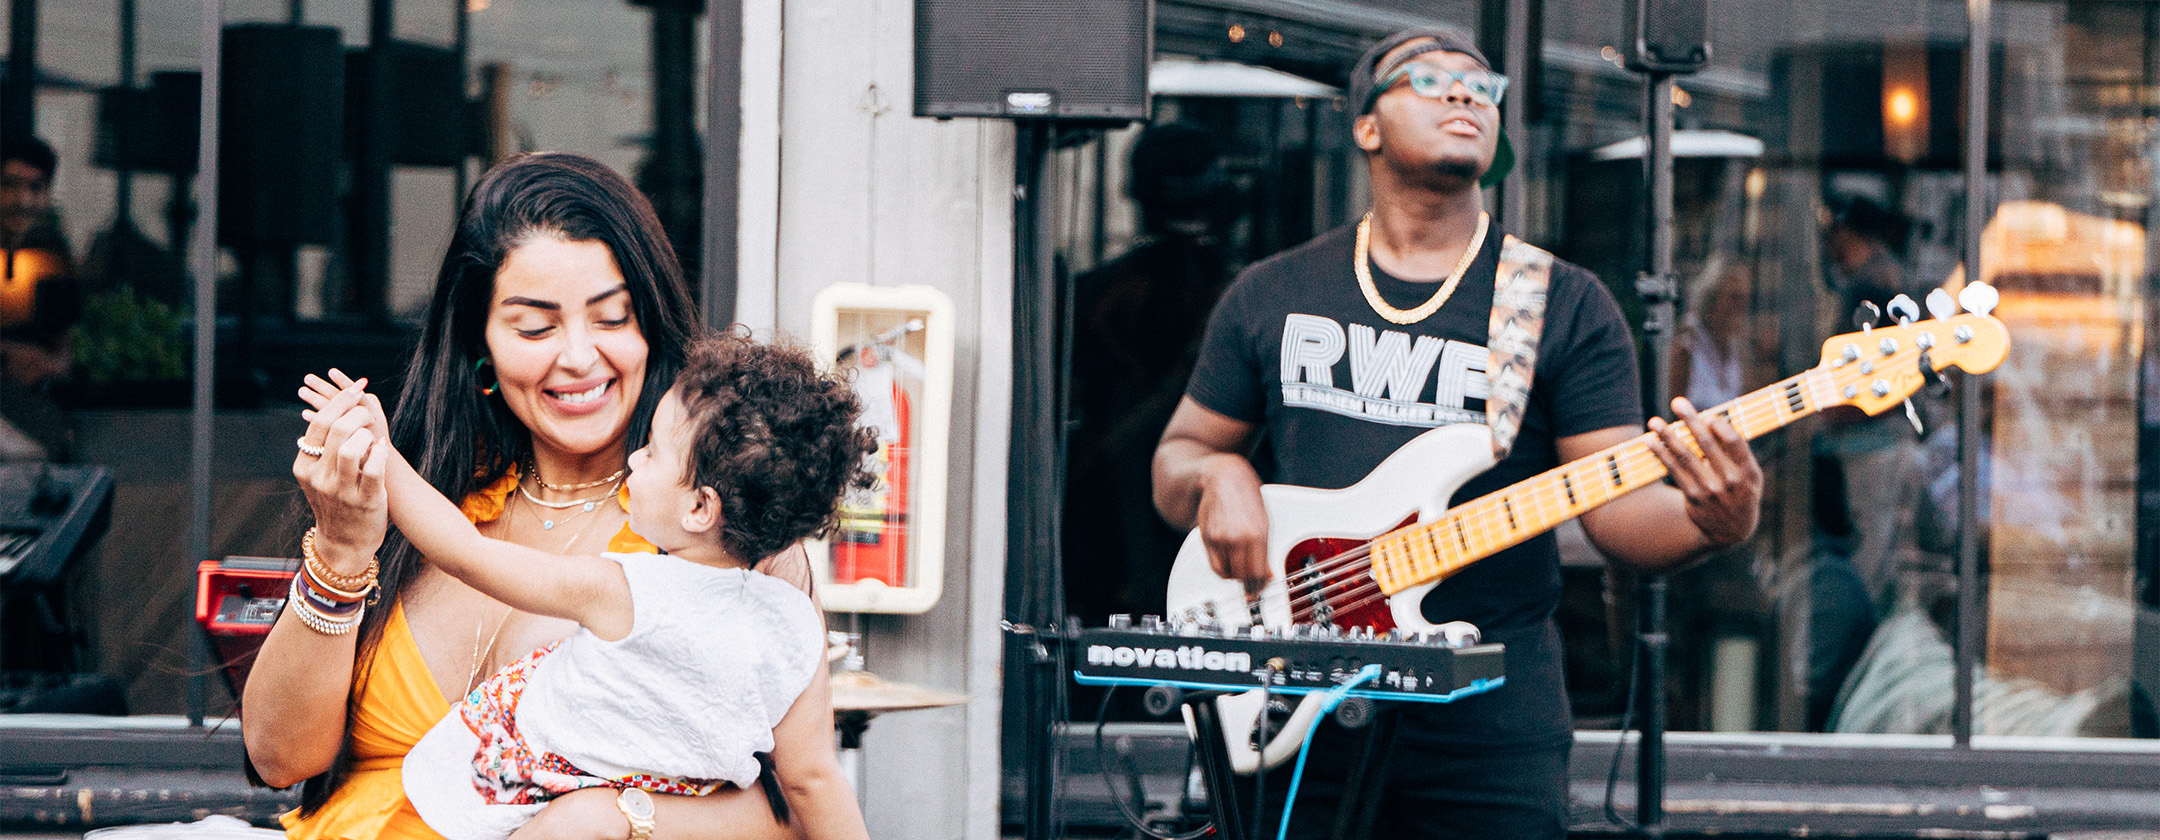 A woman dances with a small child in front of a man playing electric guitar.